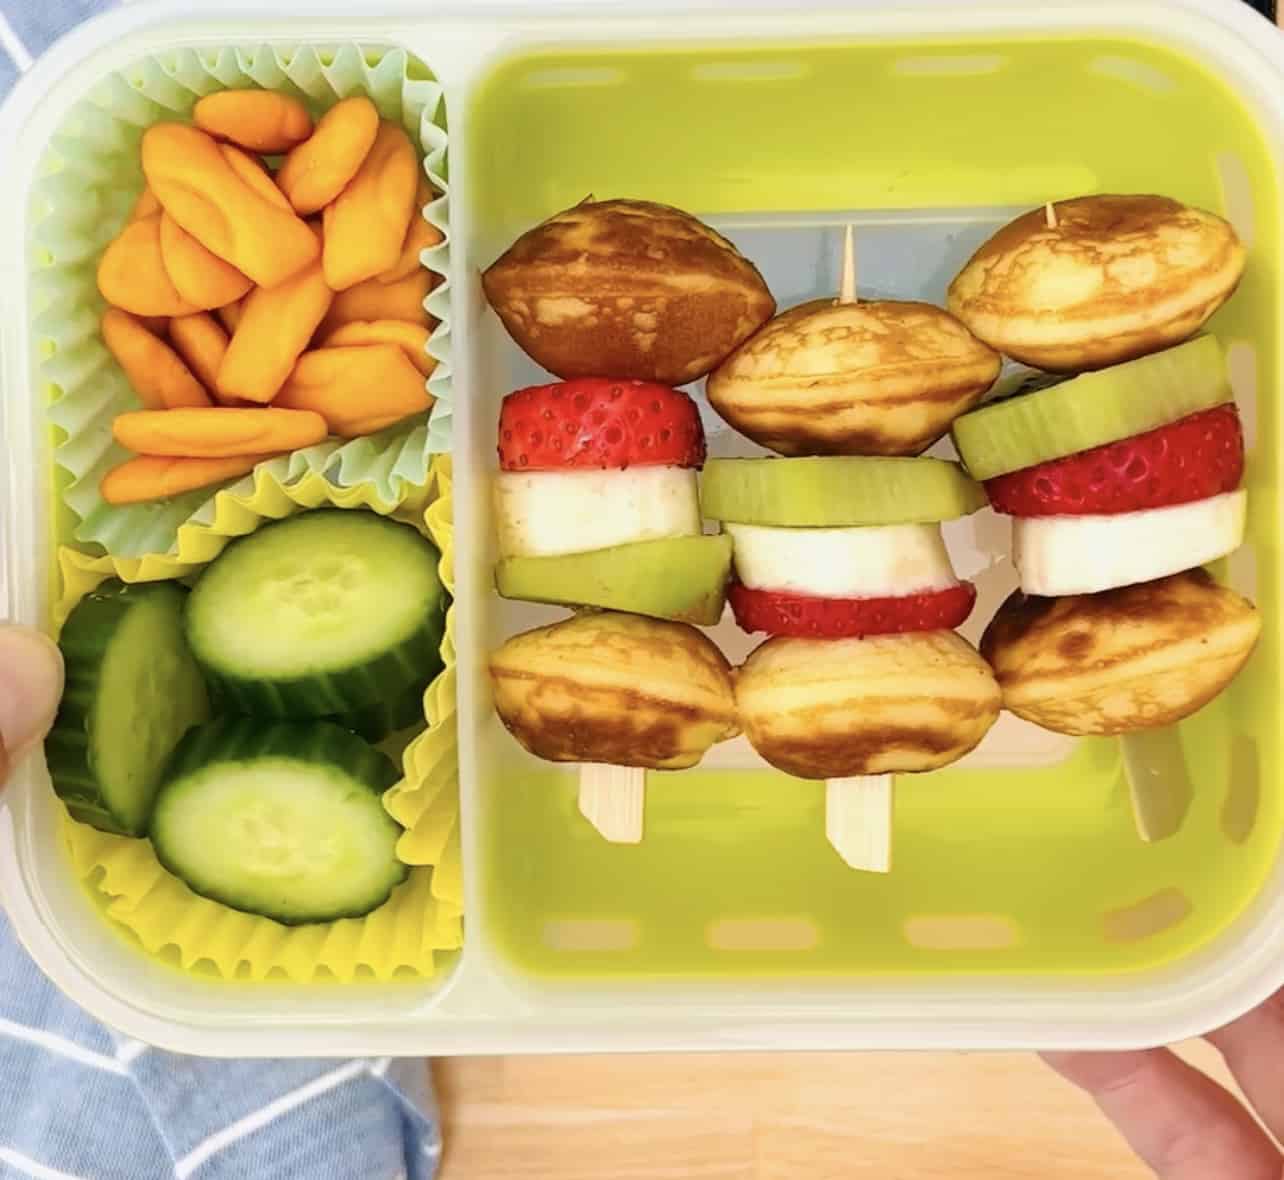 https://www.hellowonderful.co/wp-content/uploads/2022/08/unique-bento-lunch-boxes-for-kids.jpg